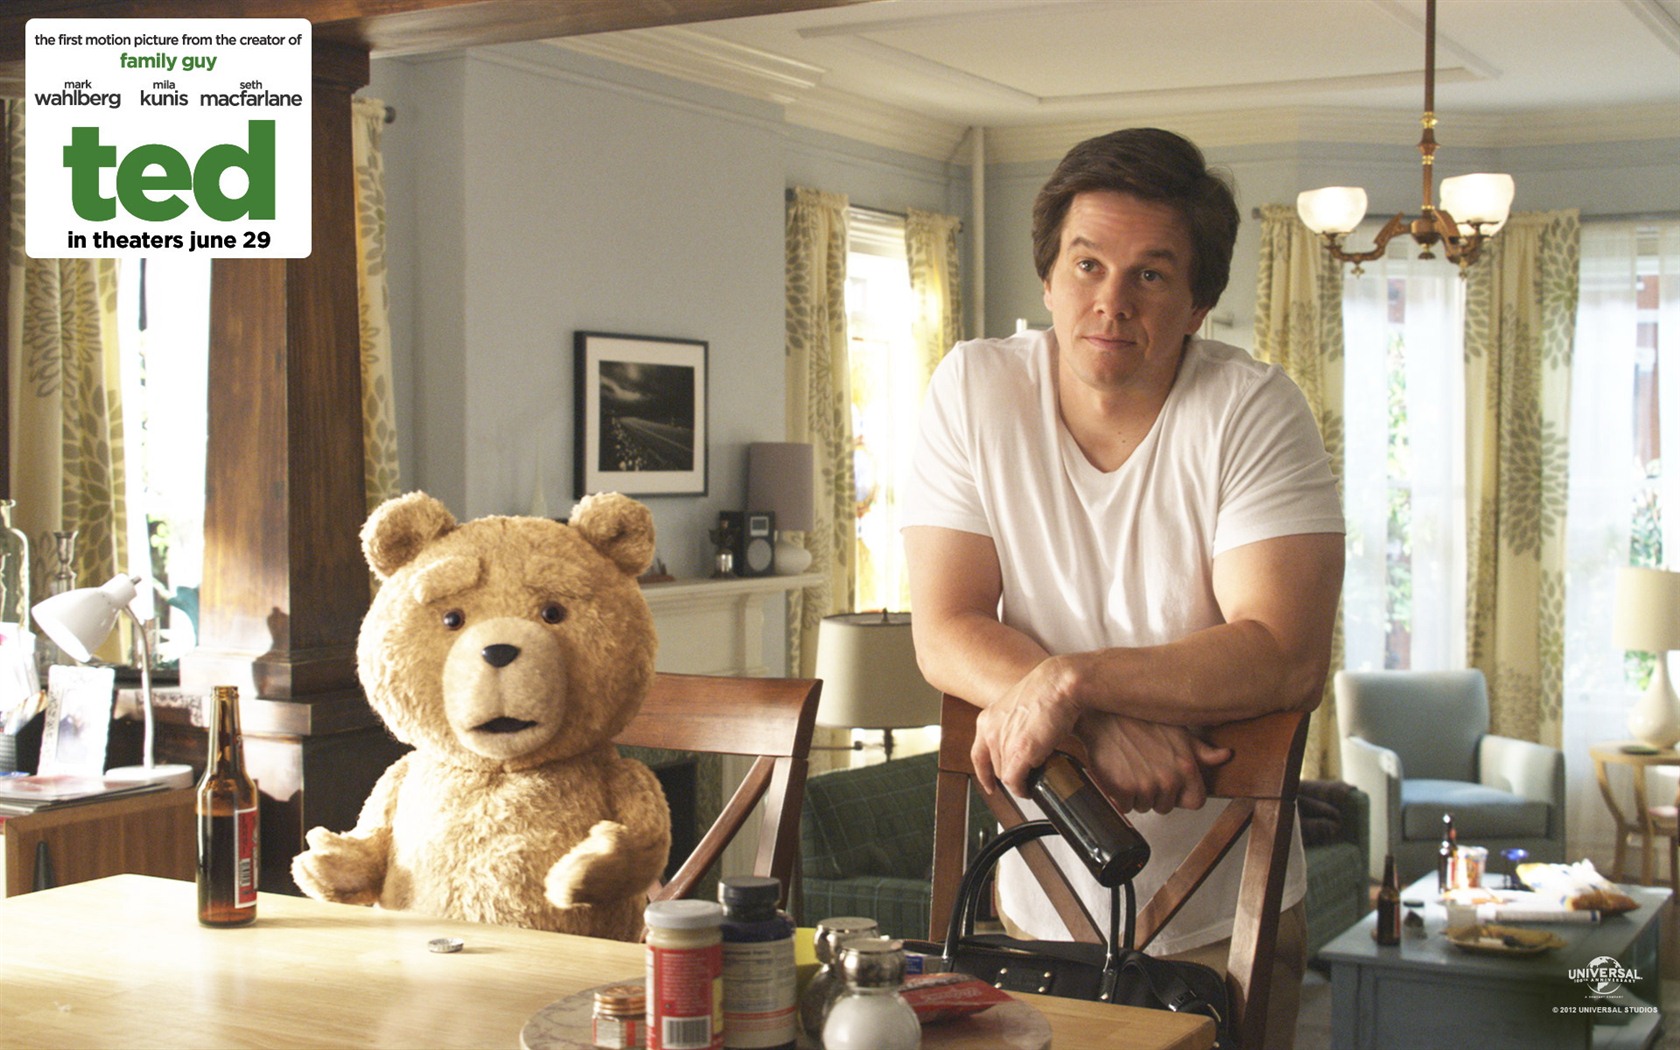 Ted 2012 HD movie wallpapers #3 - 1680x1050